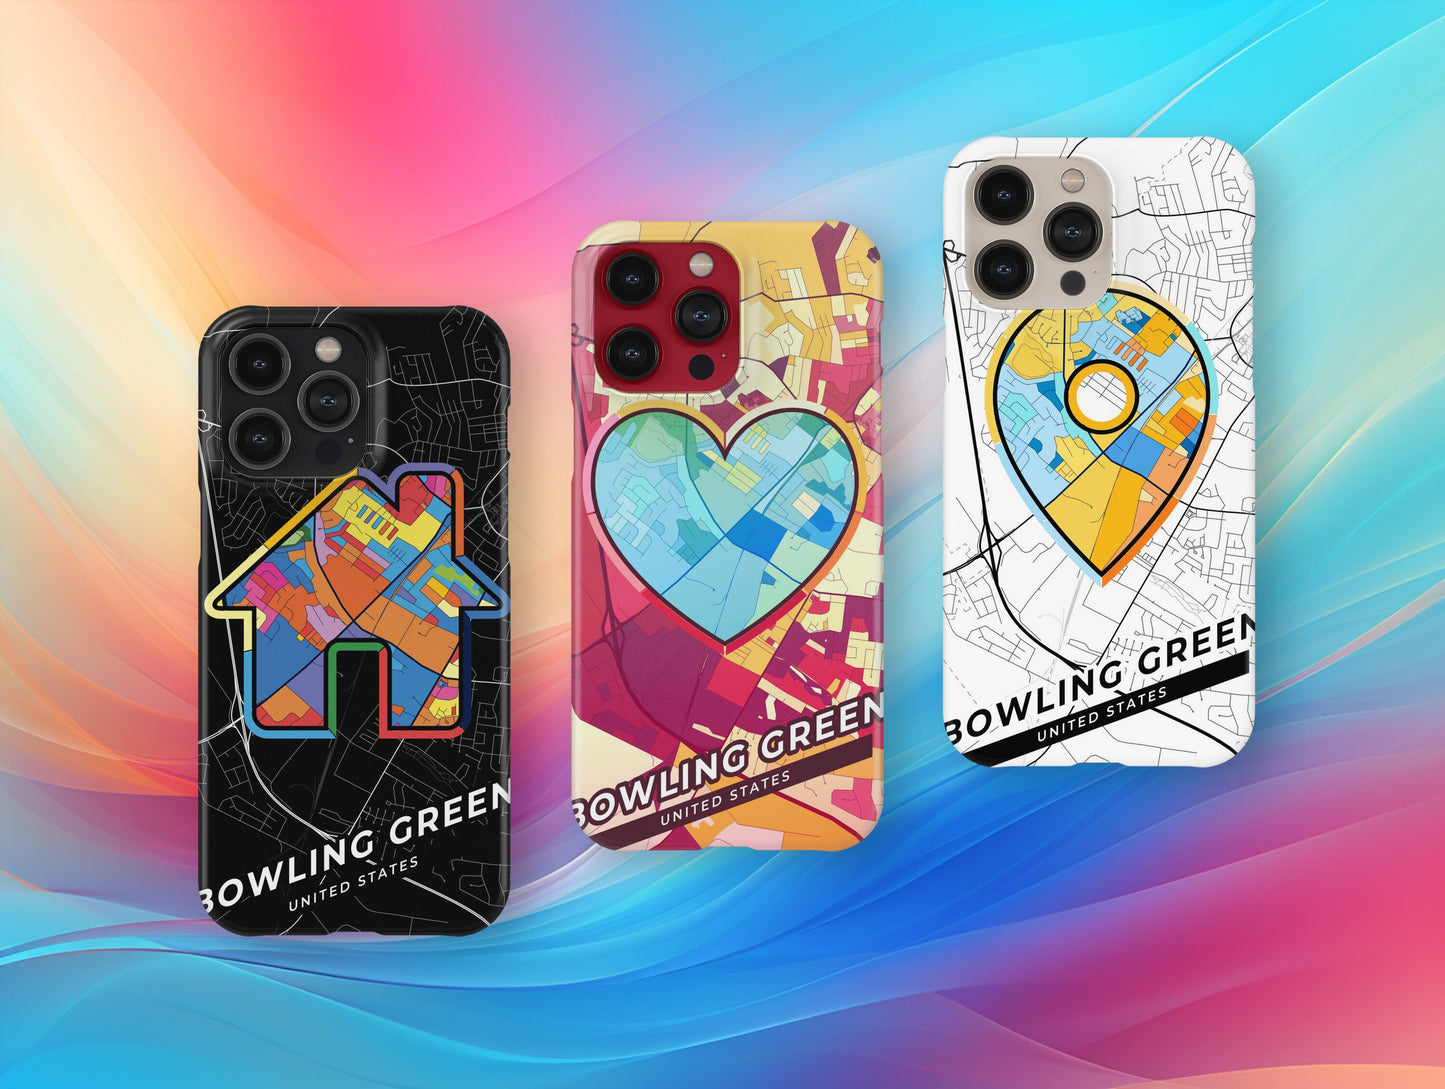 Bowling Green Kentucky slim phone case with colorful icon. Birthday, wedding or housewarming gift. Couple match cases.